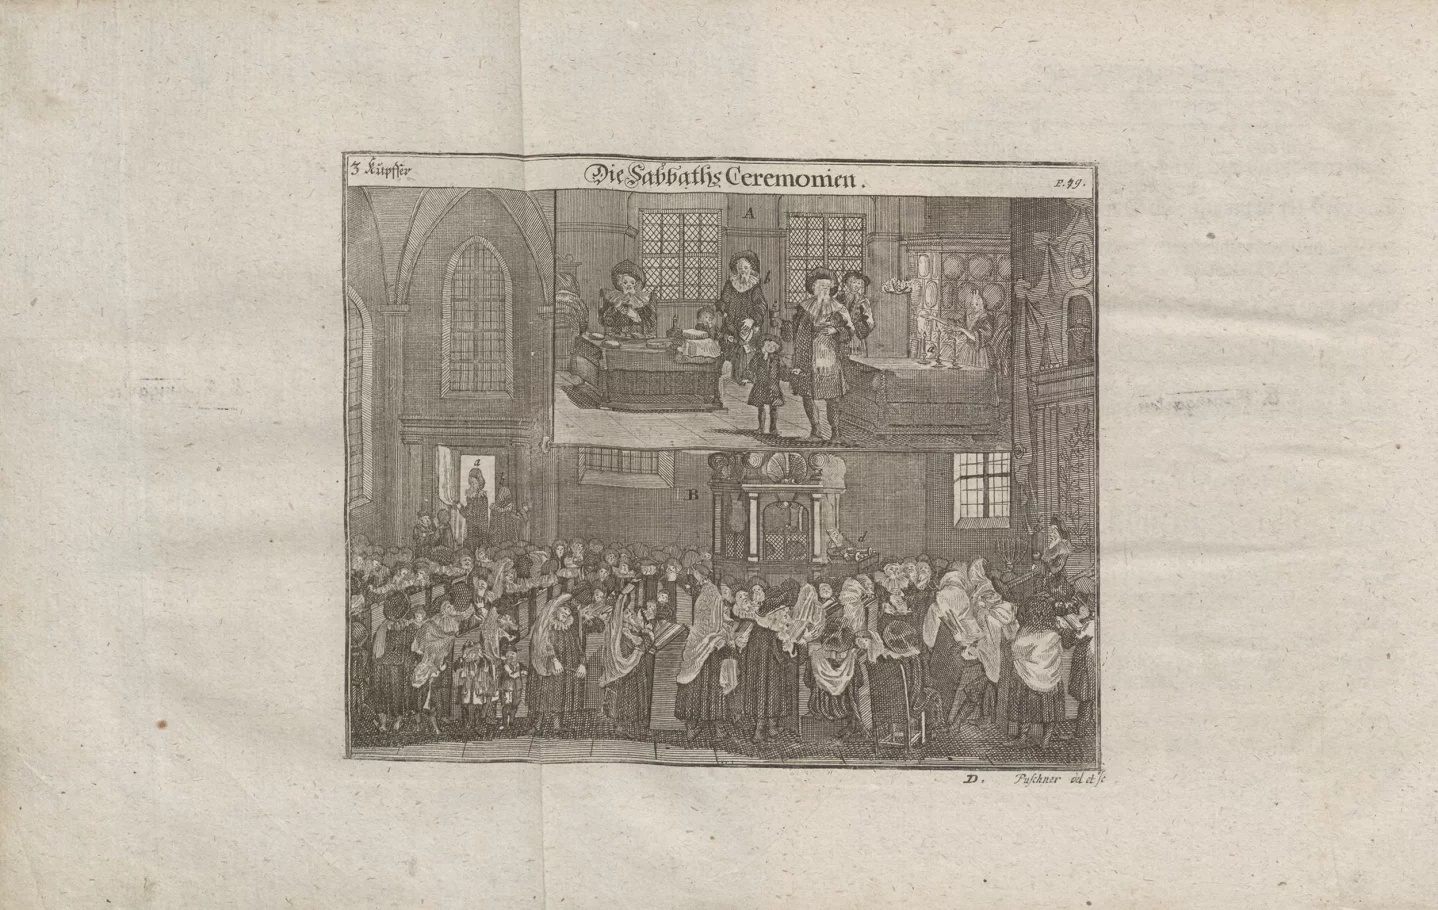 Black and white illustration. At the top, a few people gathered around the table. In the lower part there is a crowd of people in the synagogue.